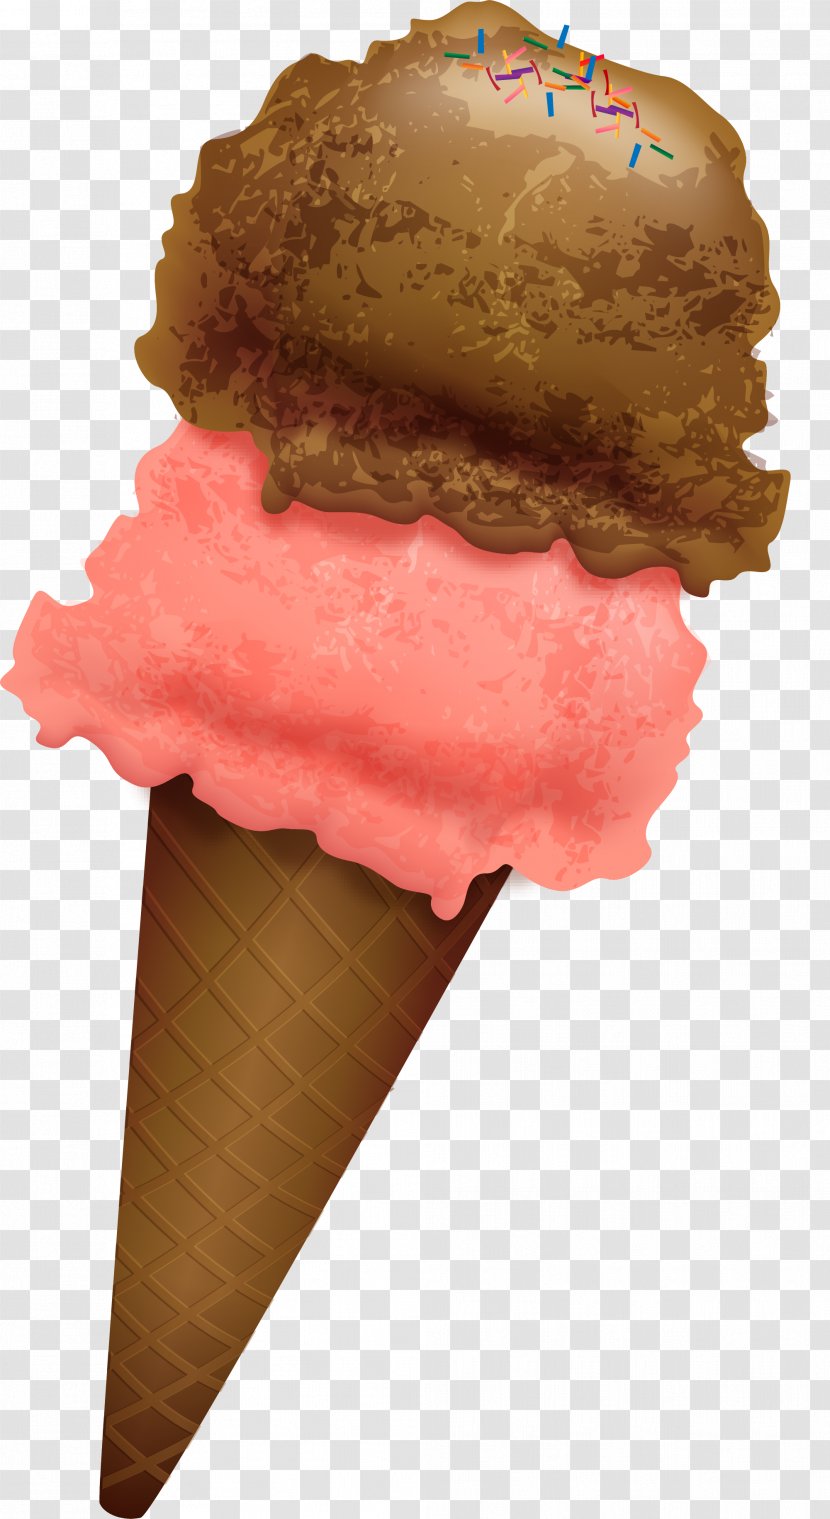 Ice Cream - Cone - Hand Painted Colorful Transparent PNG